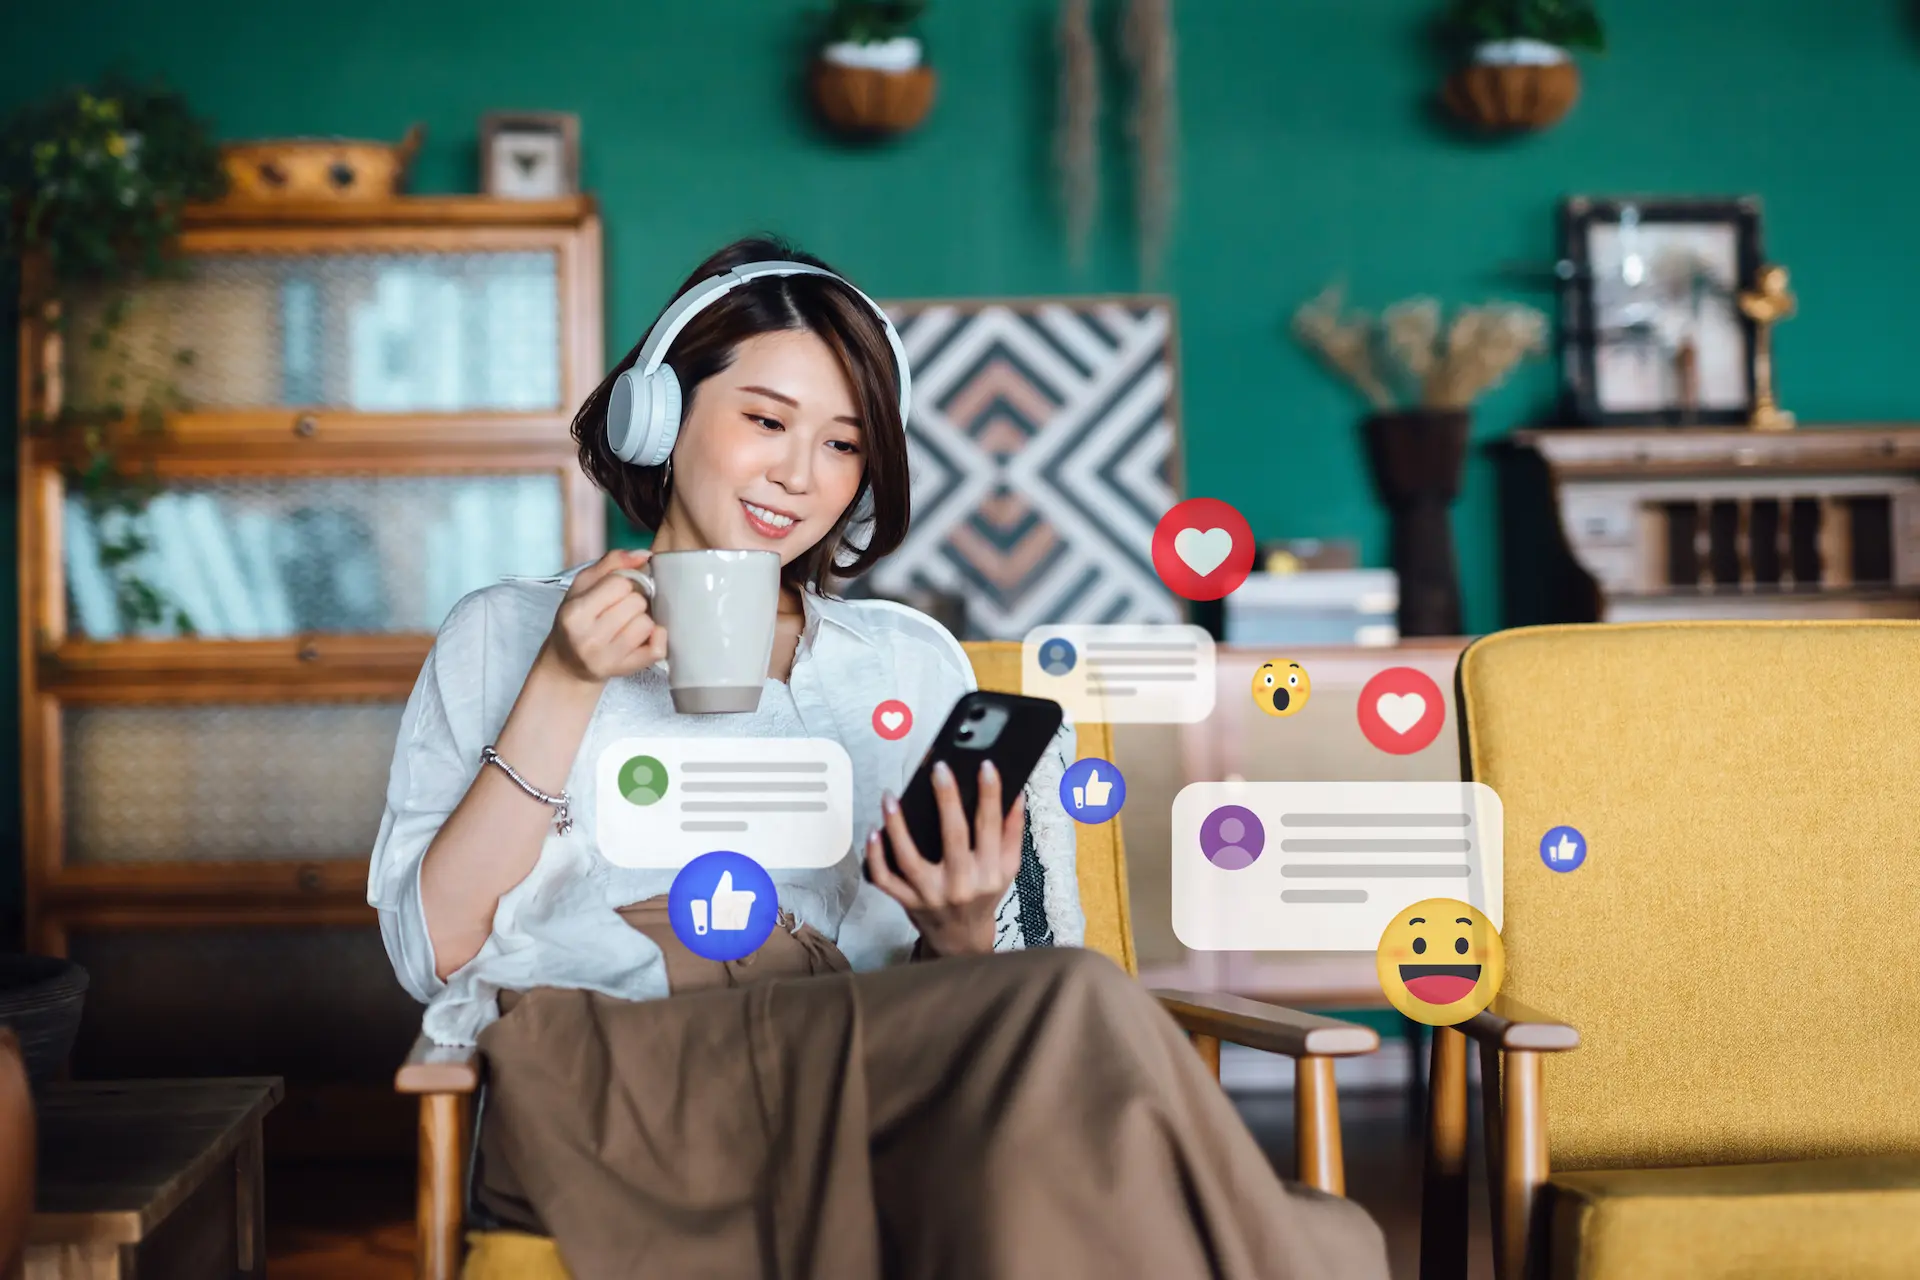 Young Asian woman with headphones relaxing at home and using smartphone, checking social media on mobile phone, receives notification, likes, views and comments.